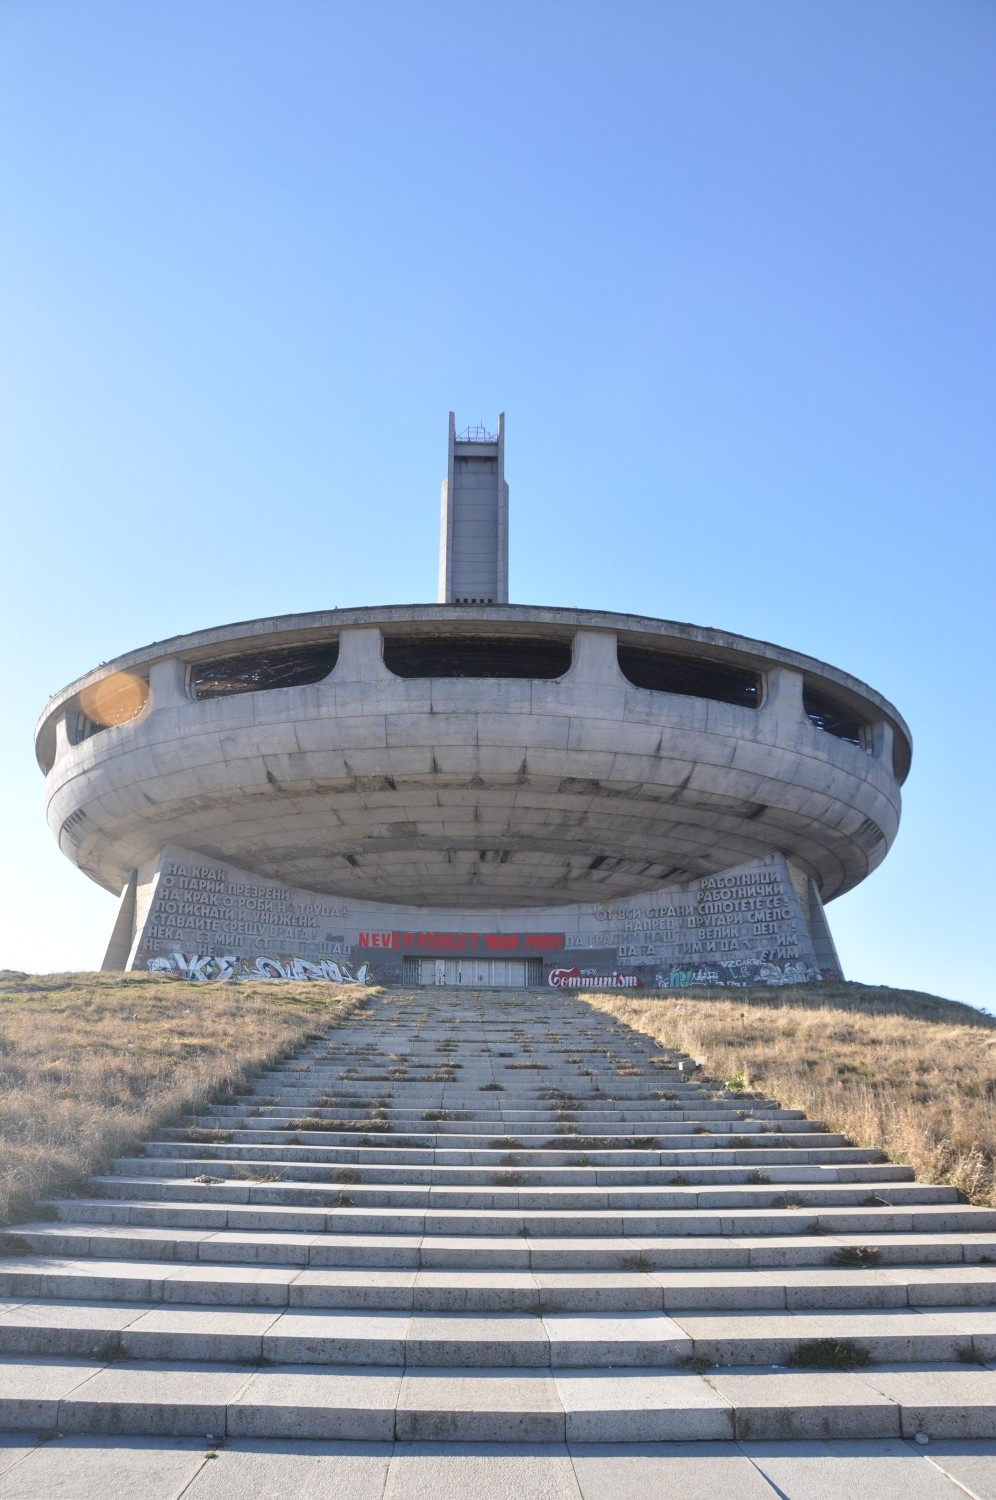 The UFO building